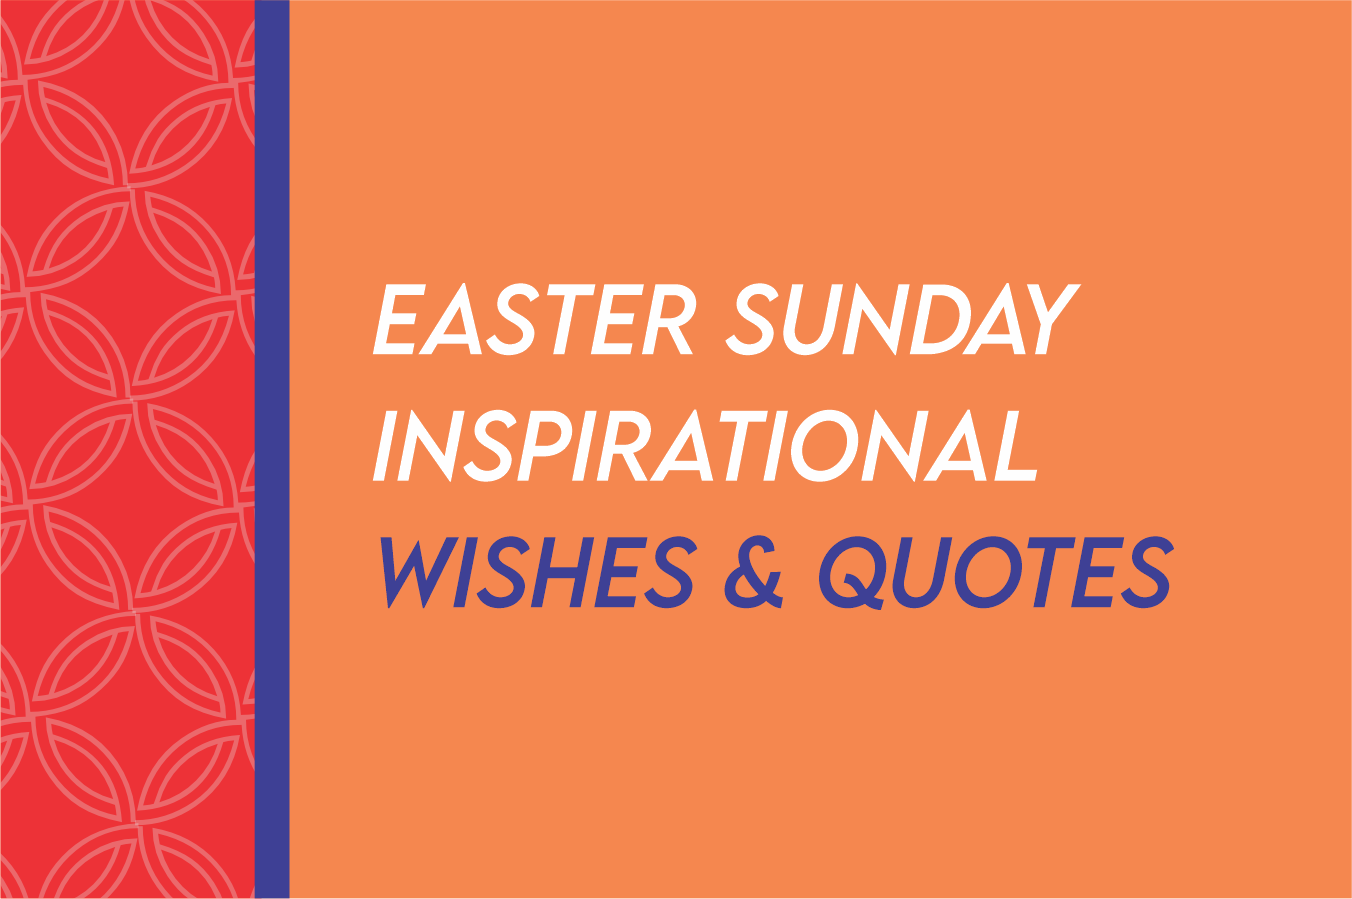 easter sunday inspirational messages